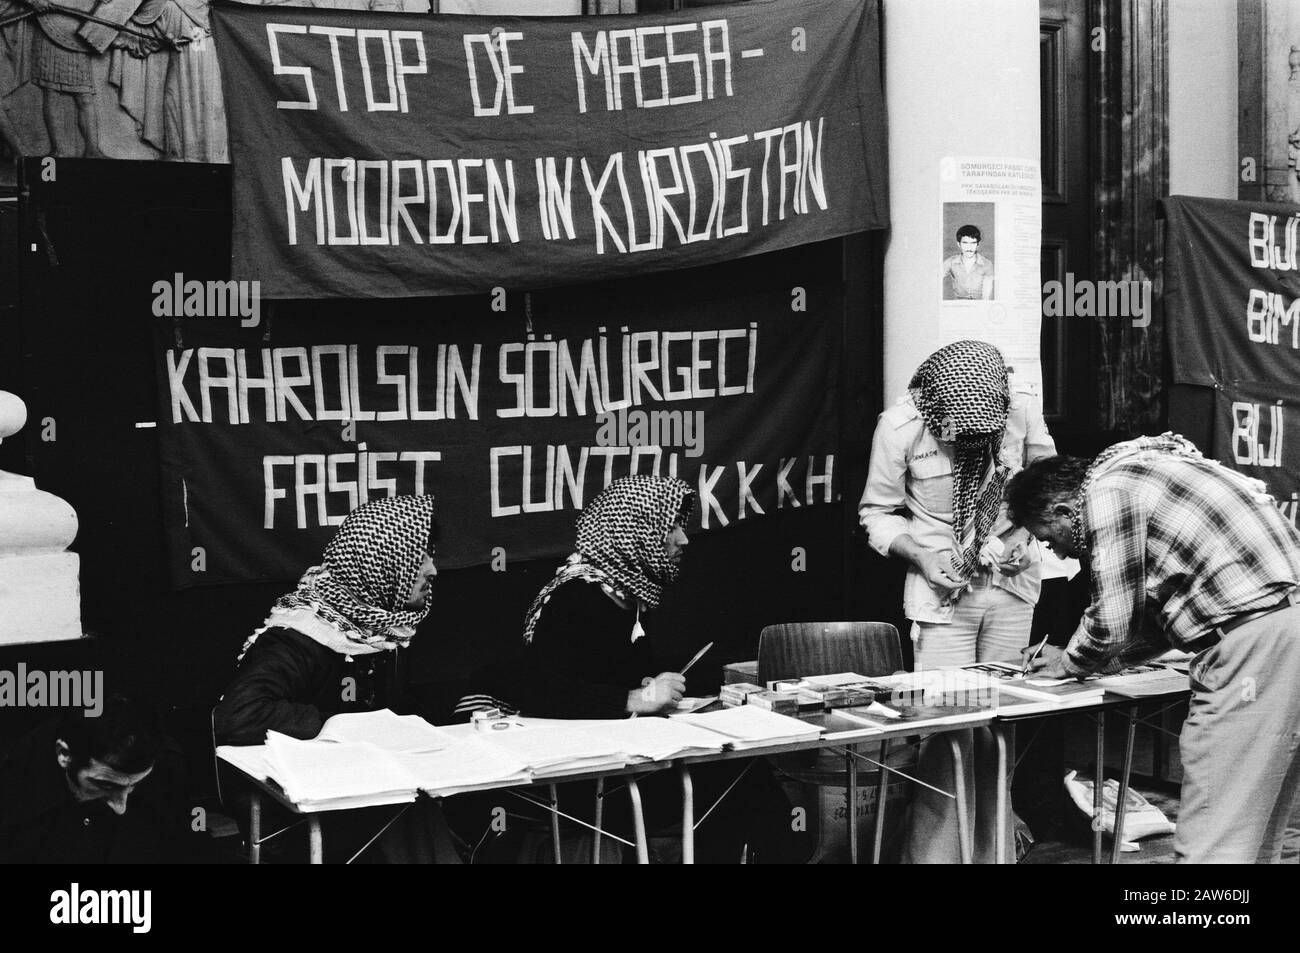 Kurdish Turks still Moses and Aaron Church in Amsterdam, in protest against the trials against Kurds in Turkey Date: April 18, 1981 Location: Amsterdam, Noord-Holland Keywords : BANNERS, churches, protests Institution Name: Moses and Aaron Church Stock Photo